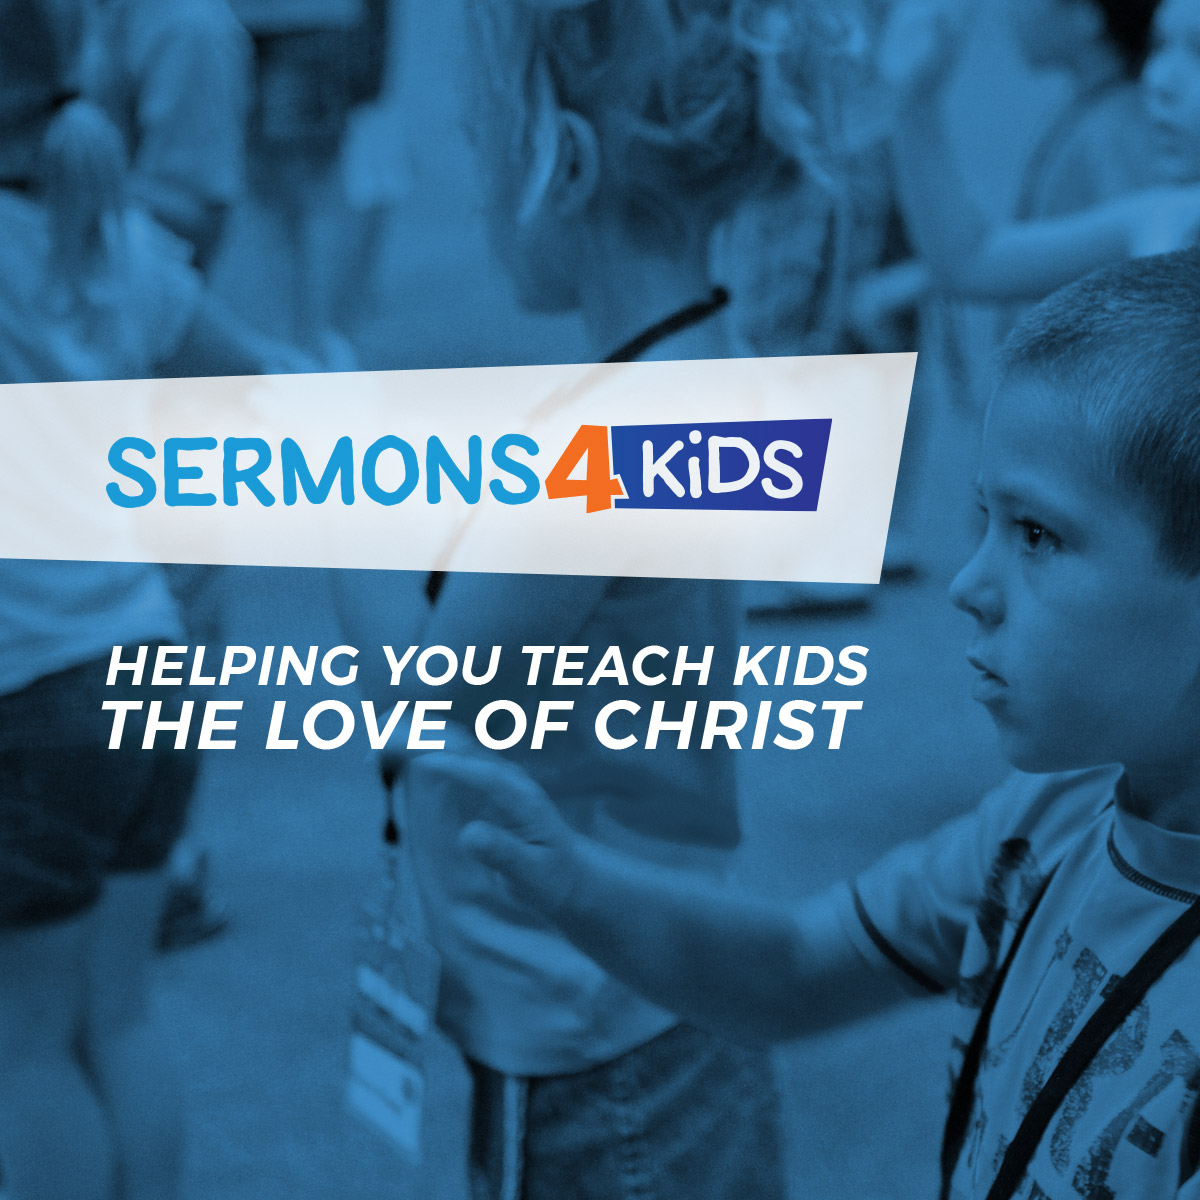 His Eye Is On The Sparrow | Children's Sermons from Sermons4Kids.com